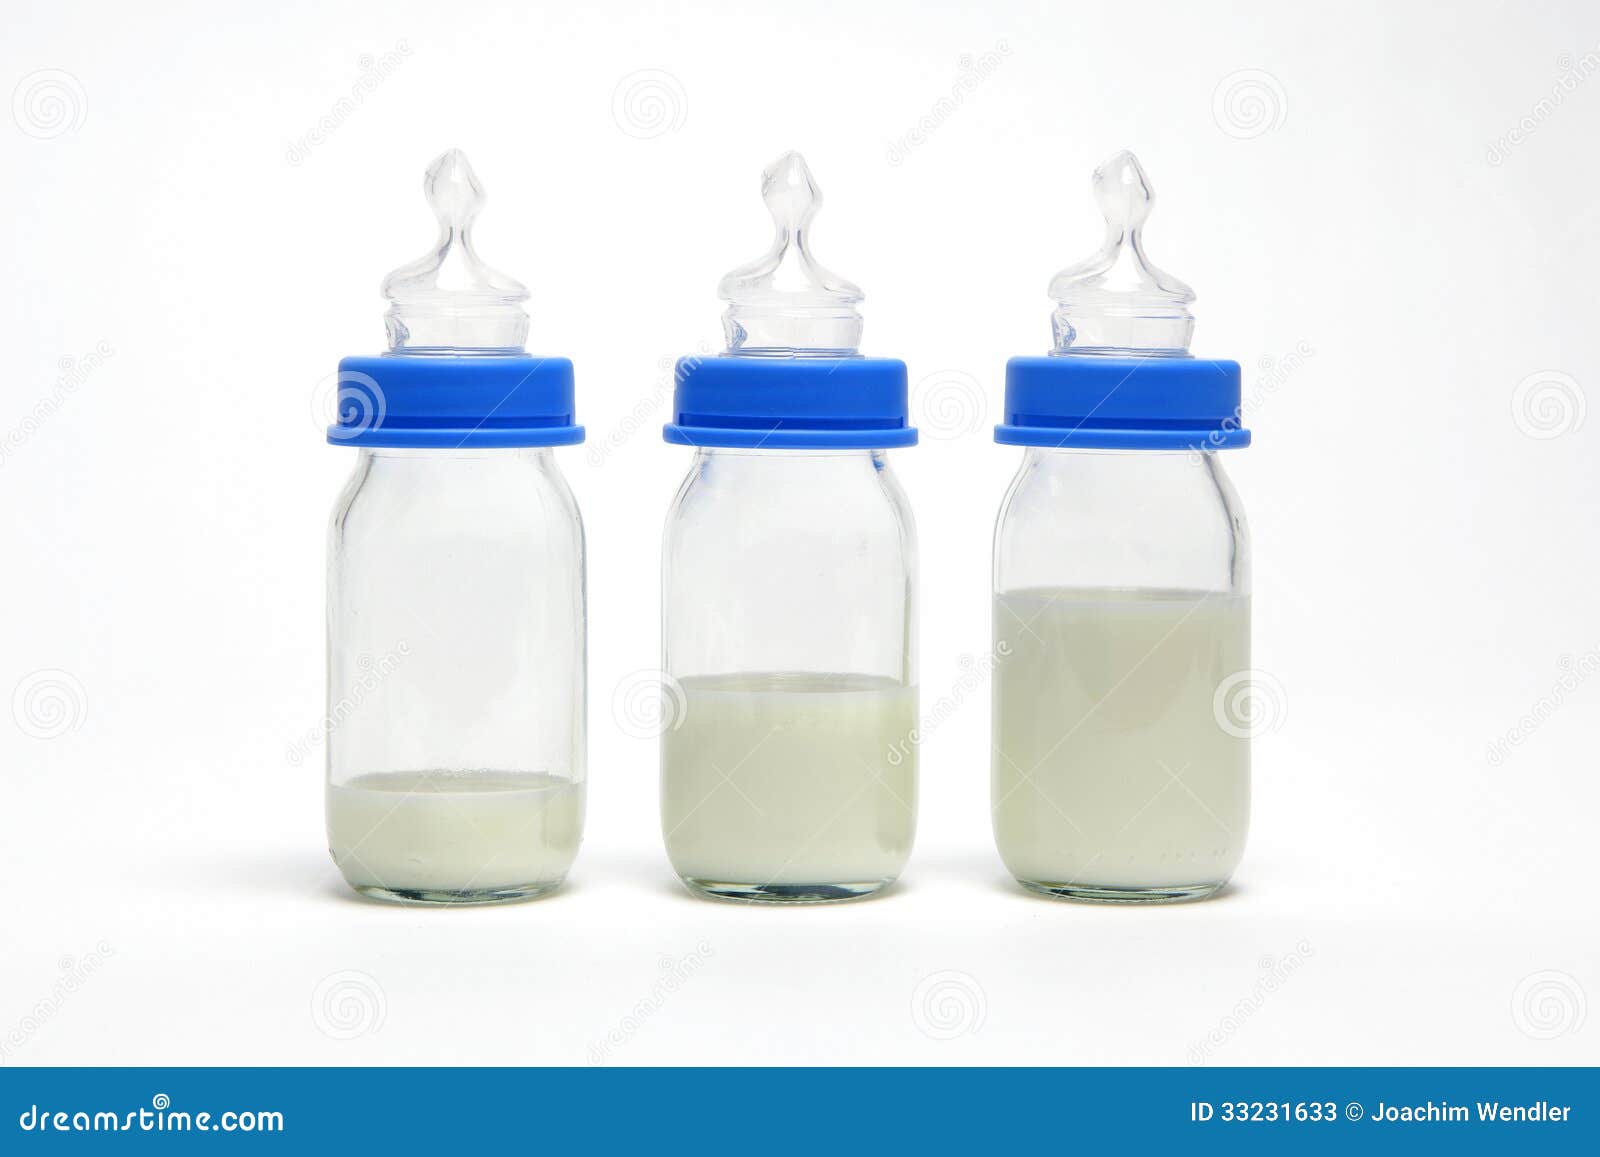 three baby bottles in a row